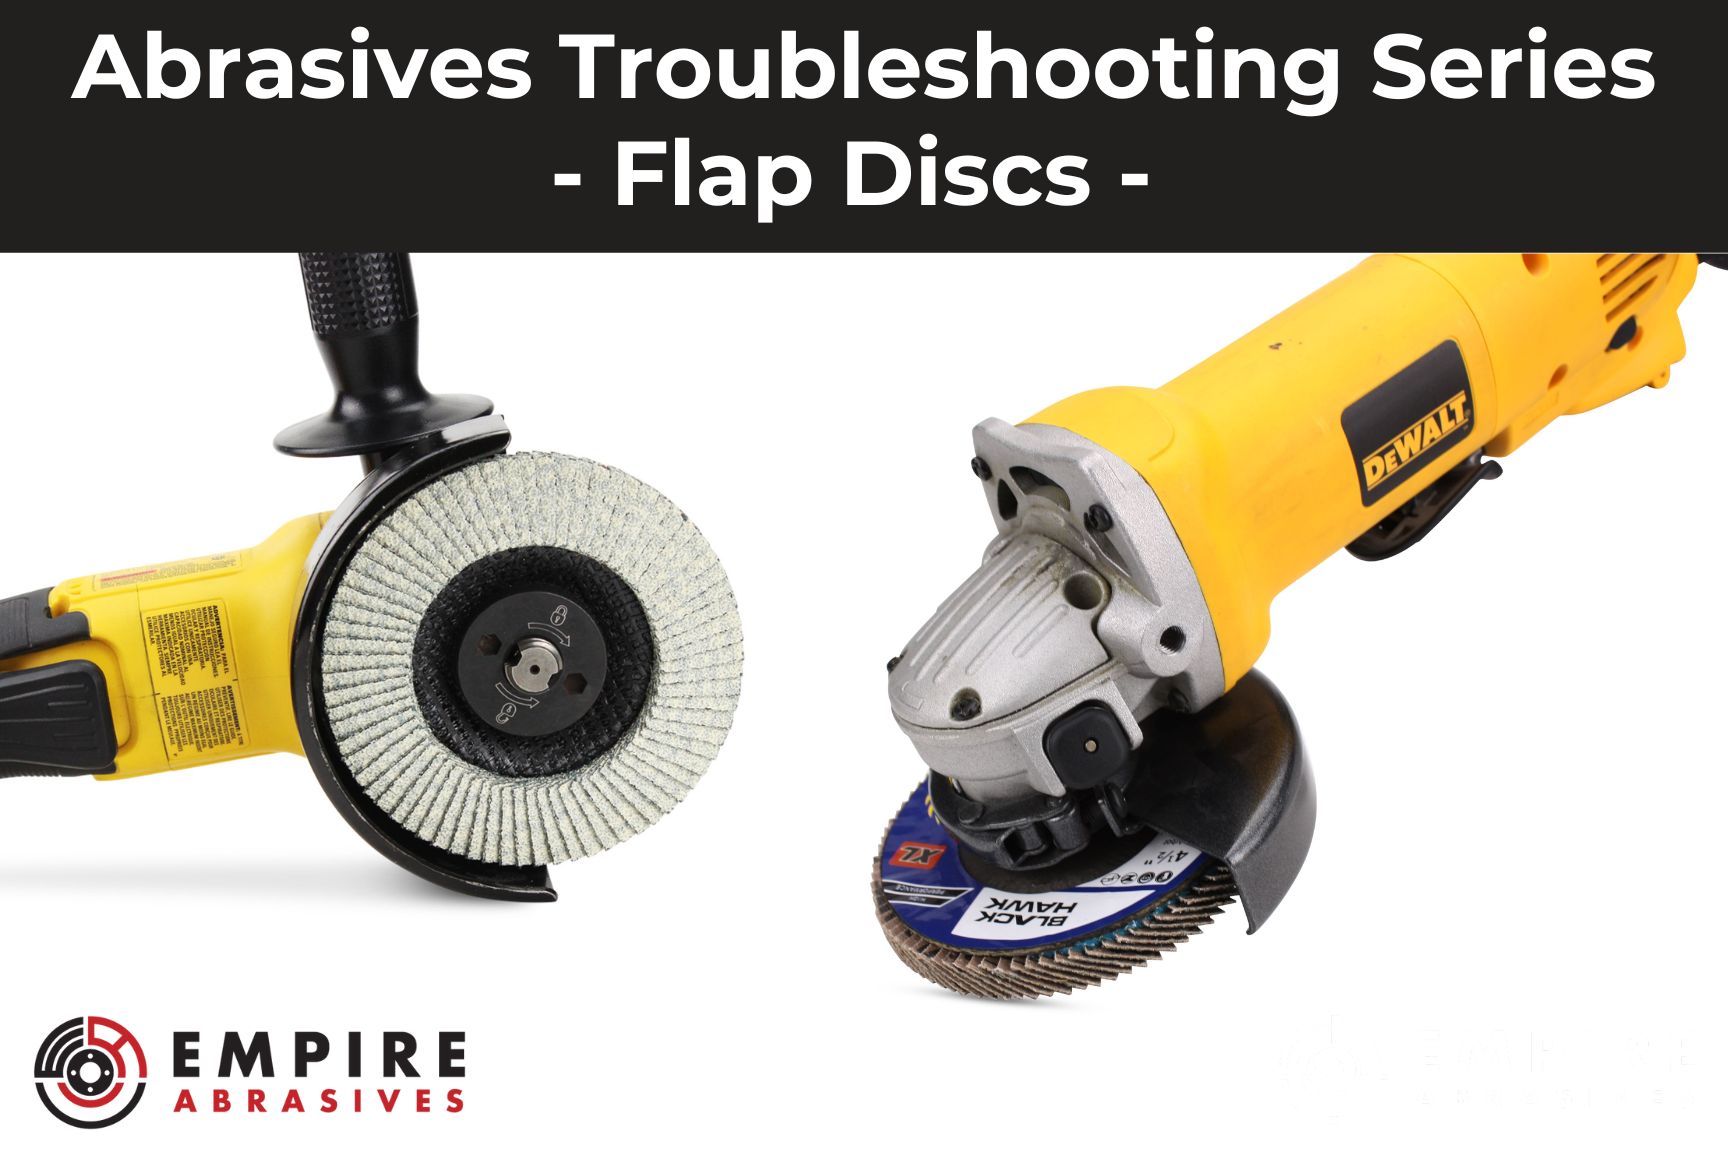 Troubleshooting Common Abrasive Tool Issues - Flap Discs